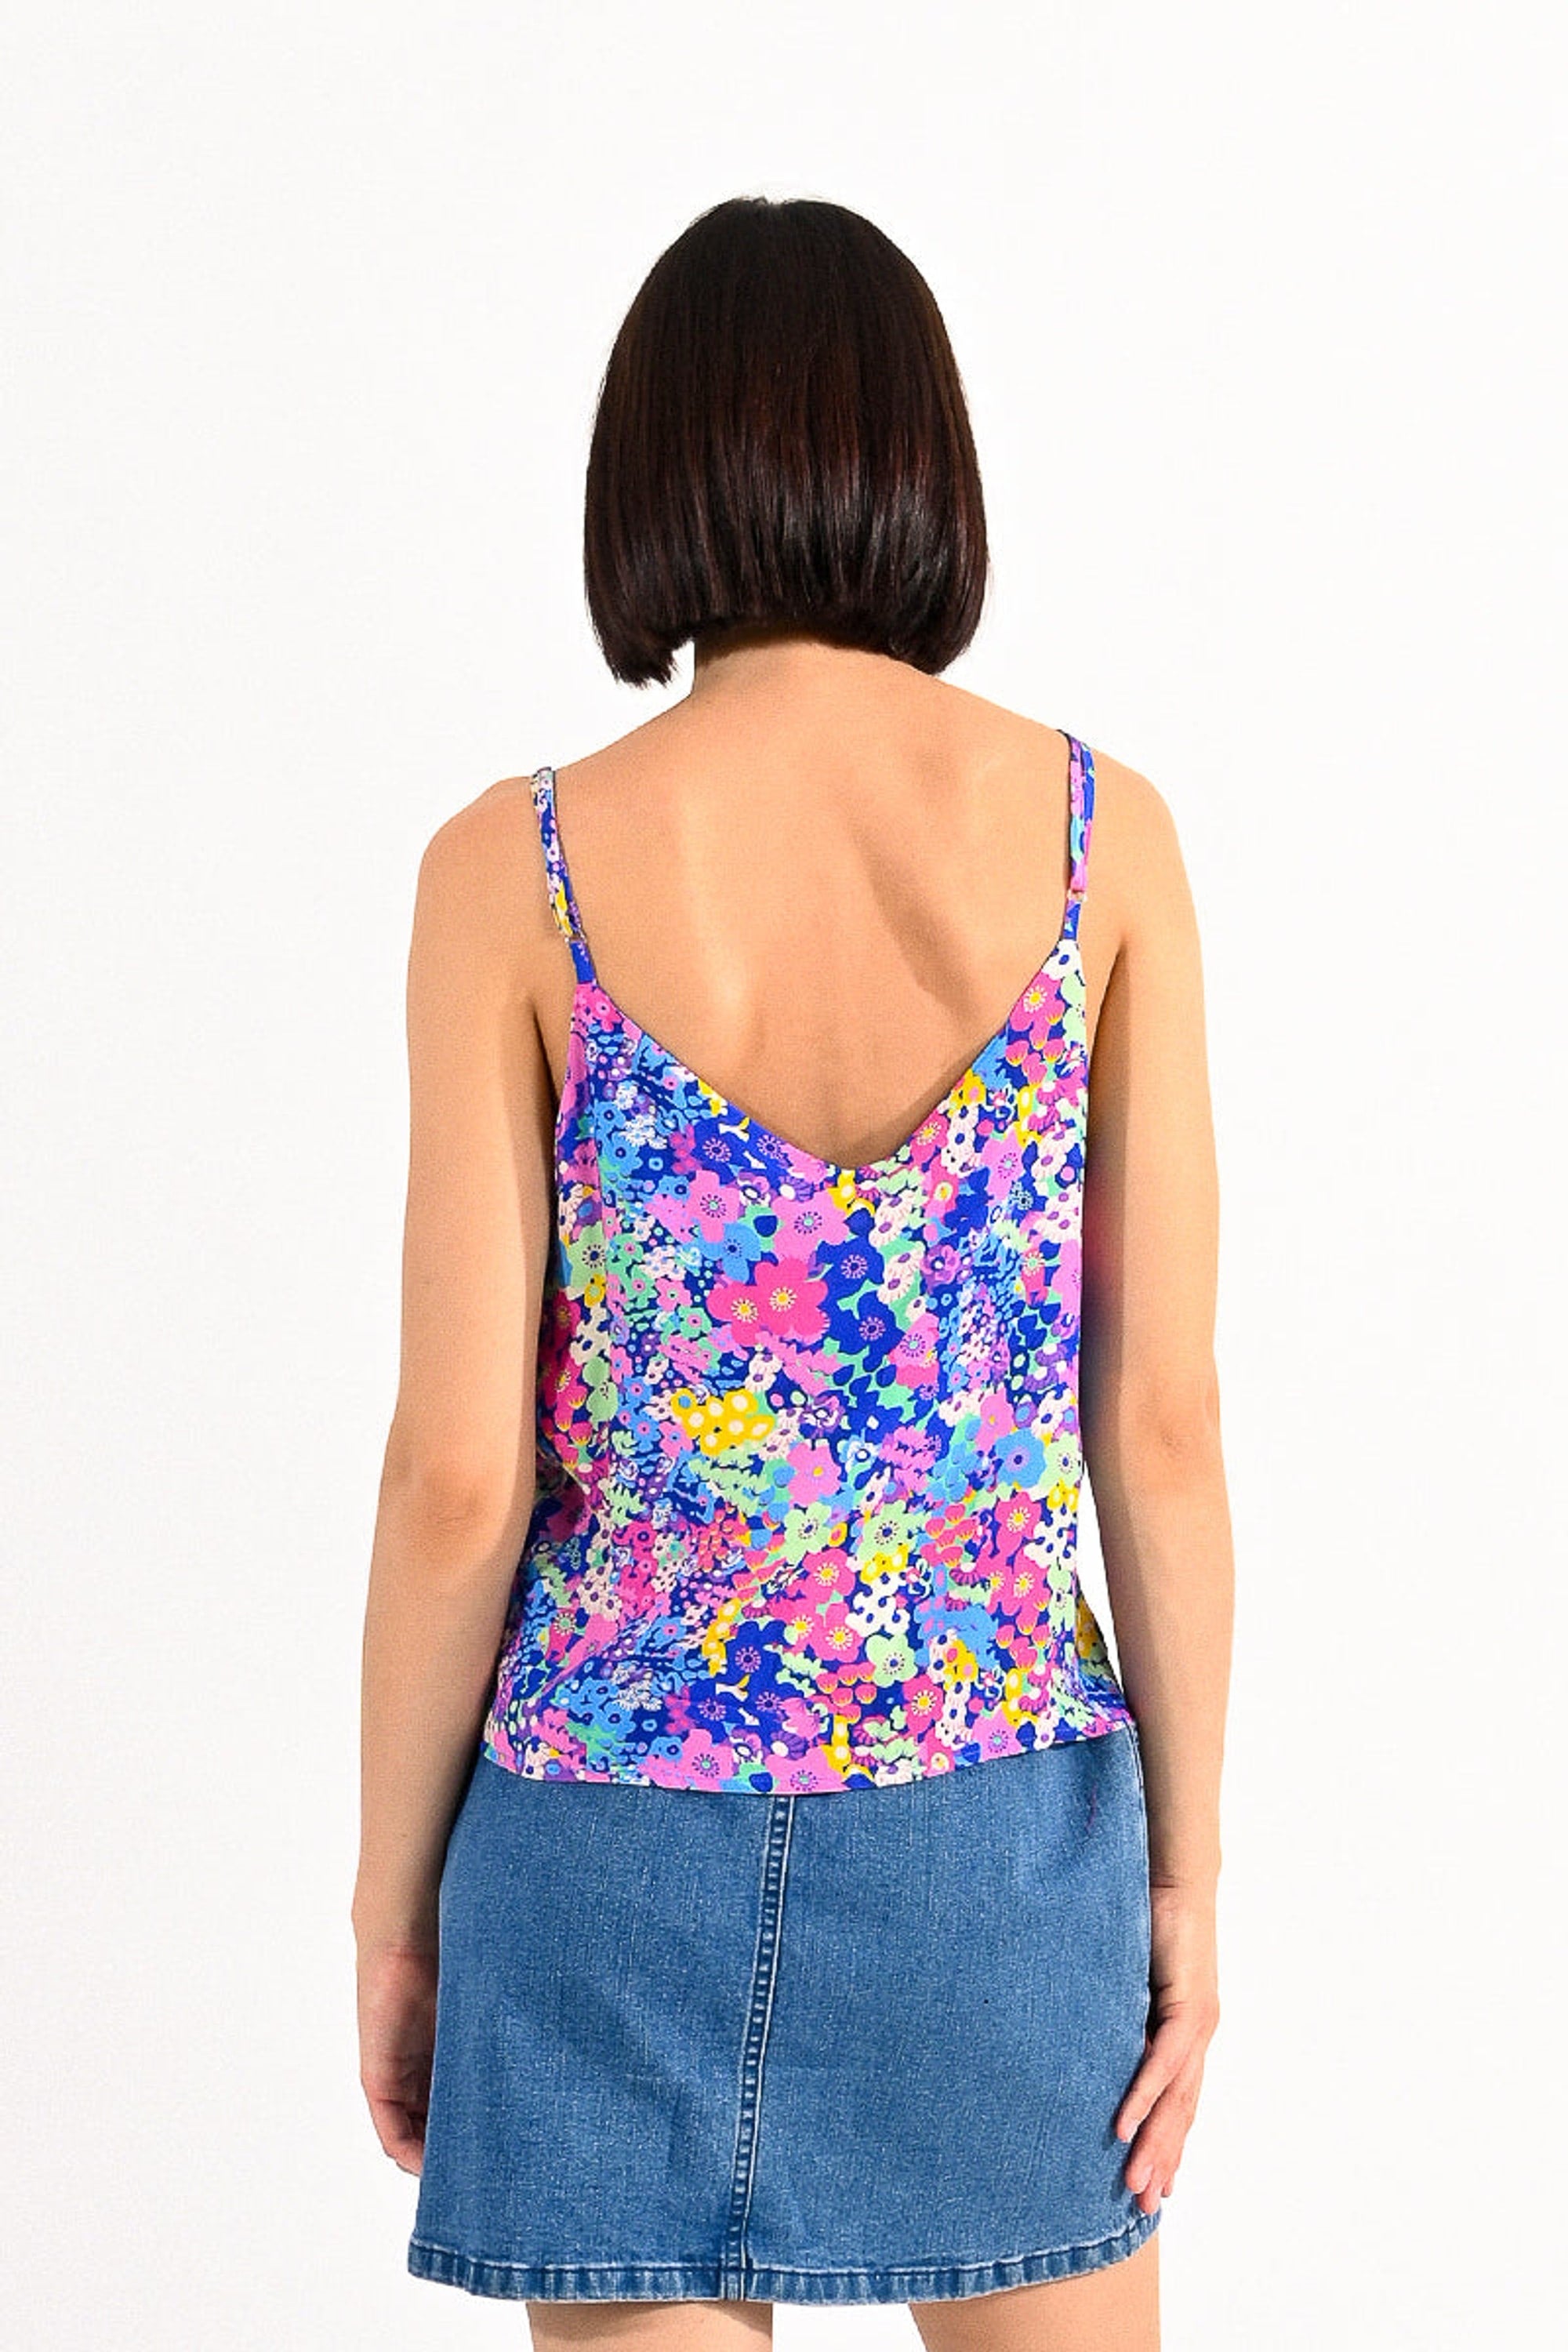 Molly Bracken woven camisole in Blue Lucy - clever alice